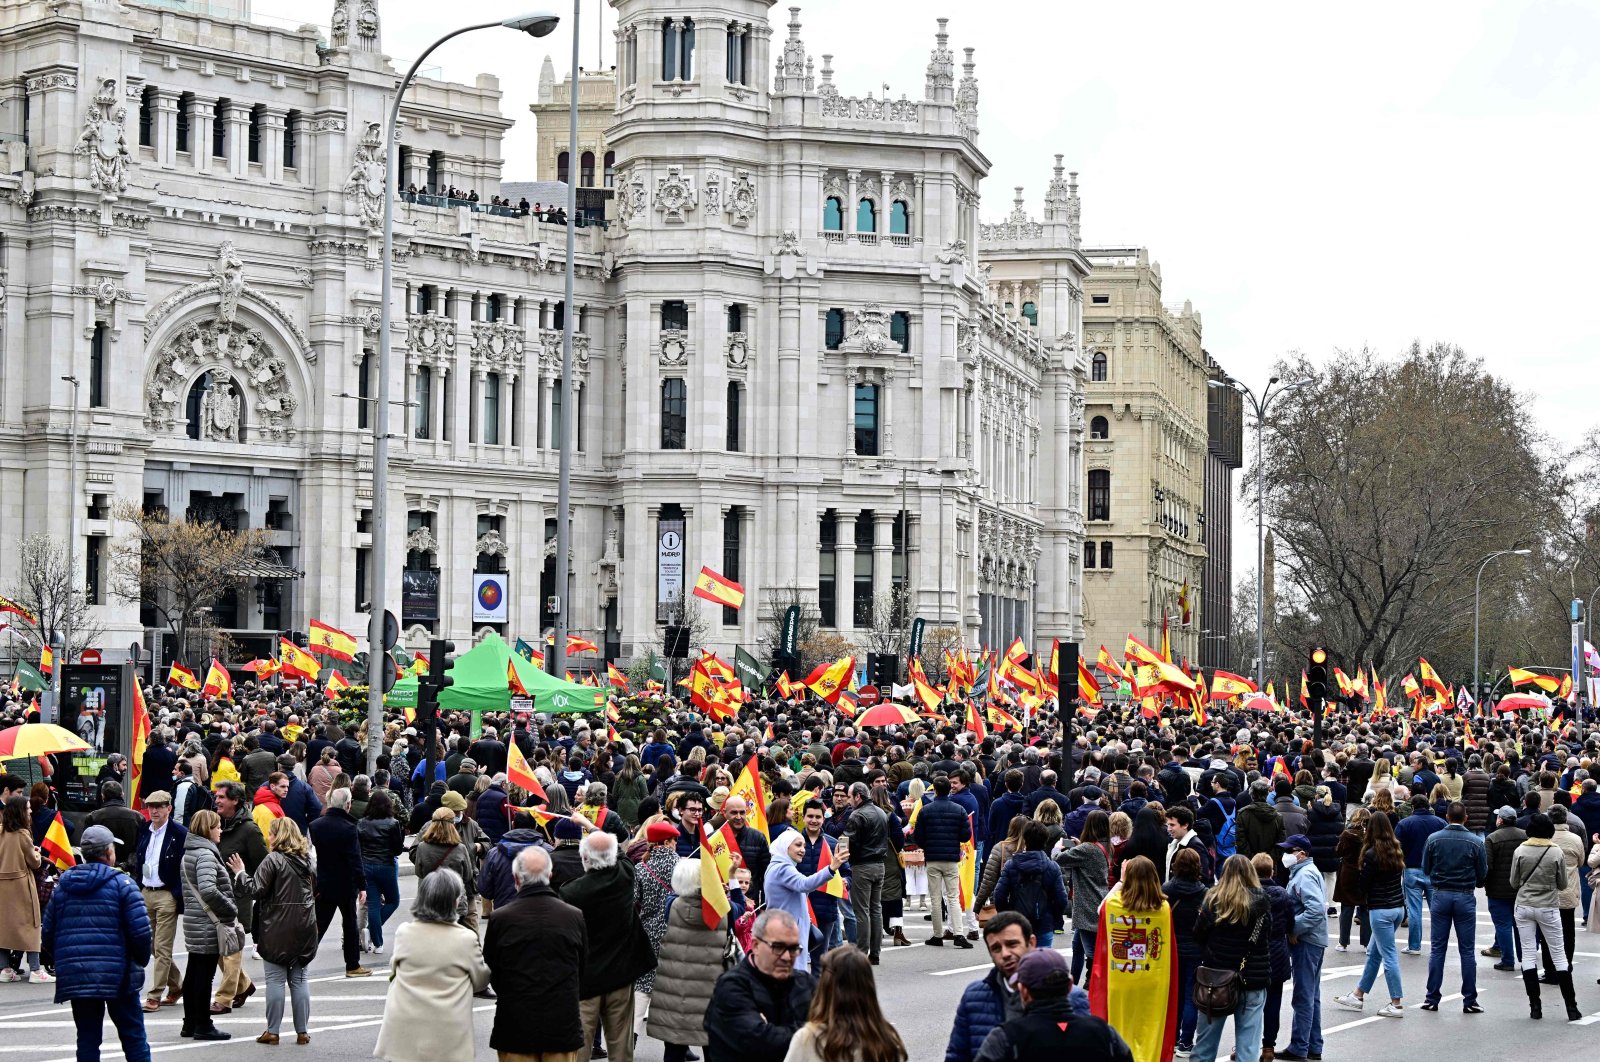 Demonstrators wave Spanish flags during a nationwide protest called by Spanish far-right Vox party against price hikes, in front of the city hall in Madrid, Spain, March 19, 2022. (AFP Photo)